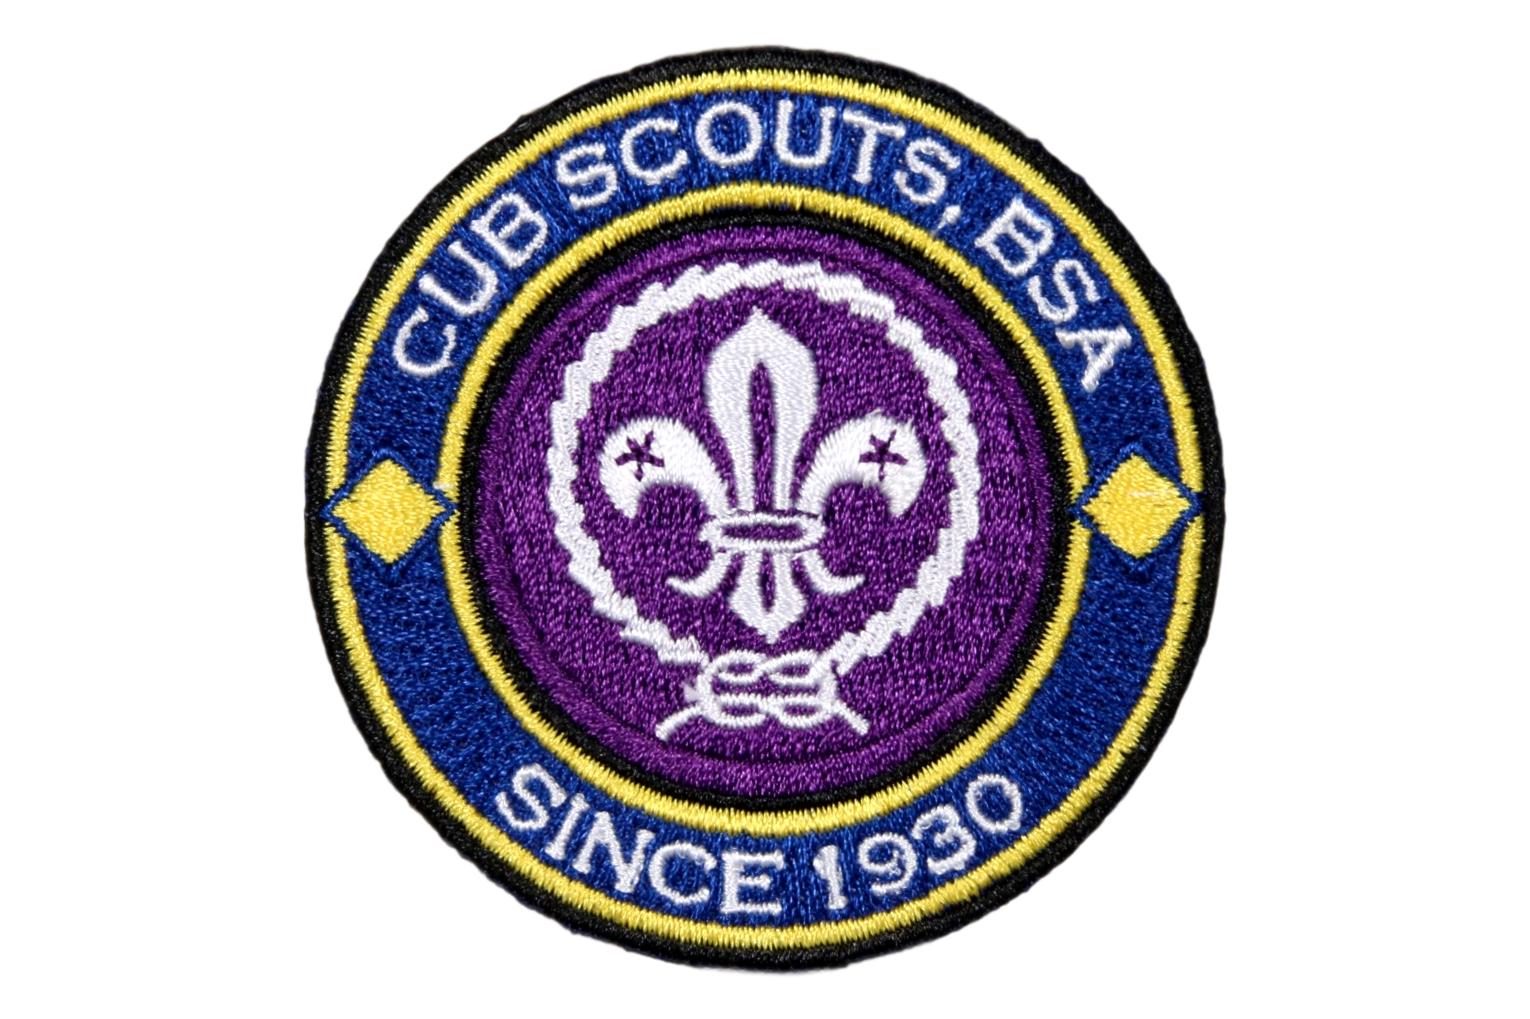 World Crest Ring Cub Scouts B.S.A. Since 1930 Ring